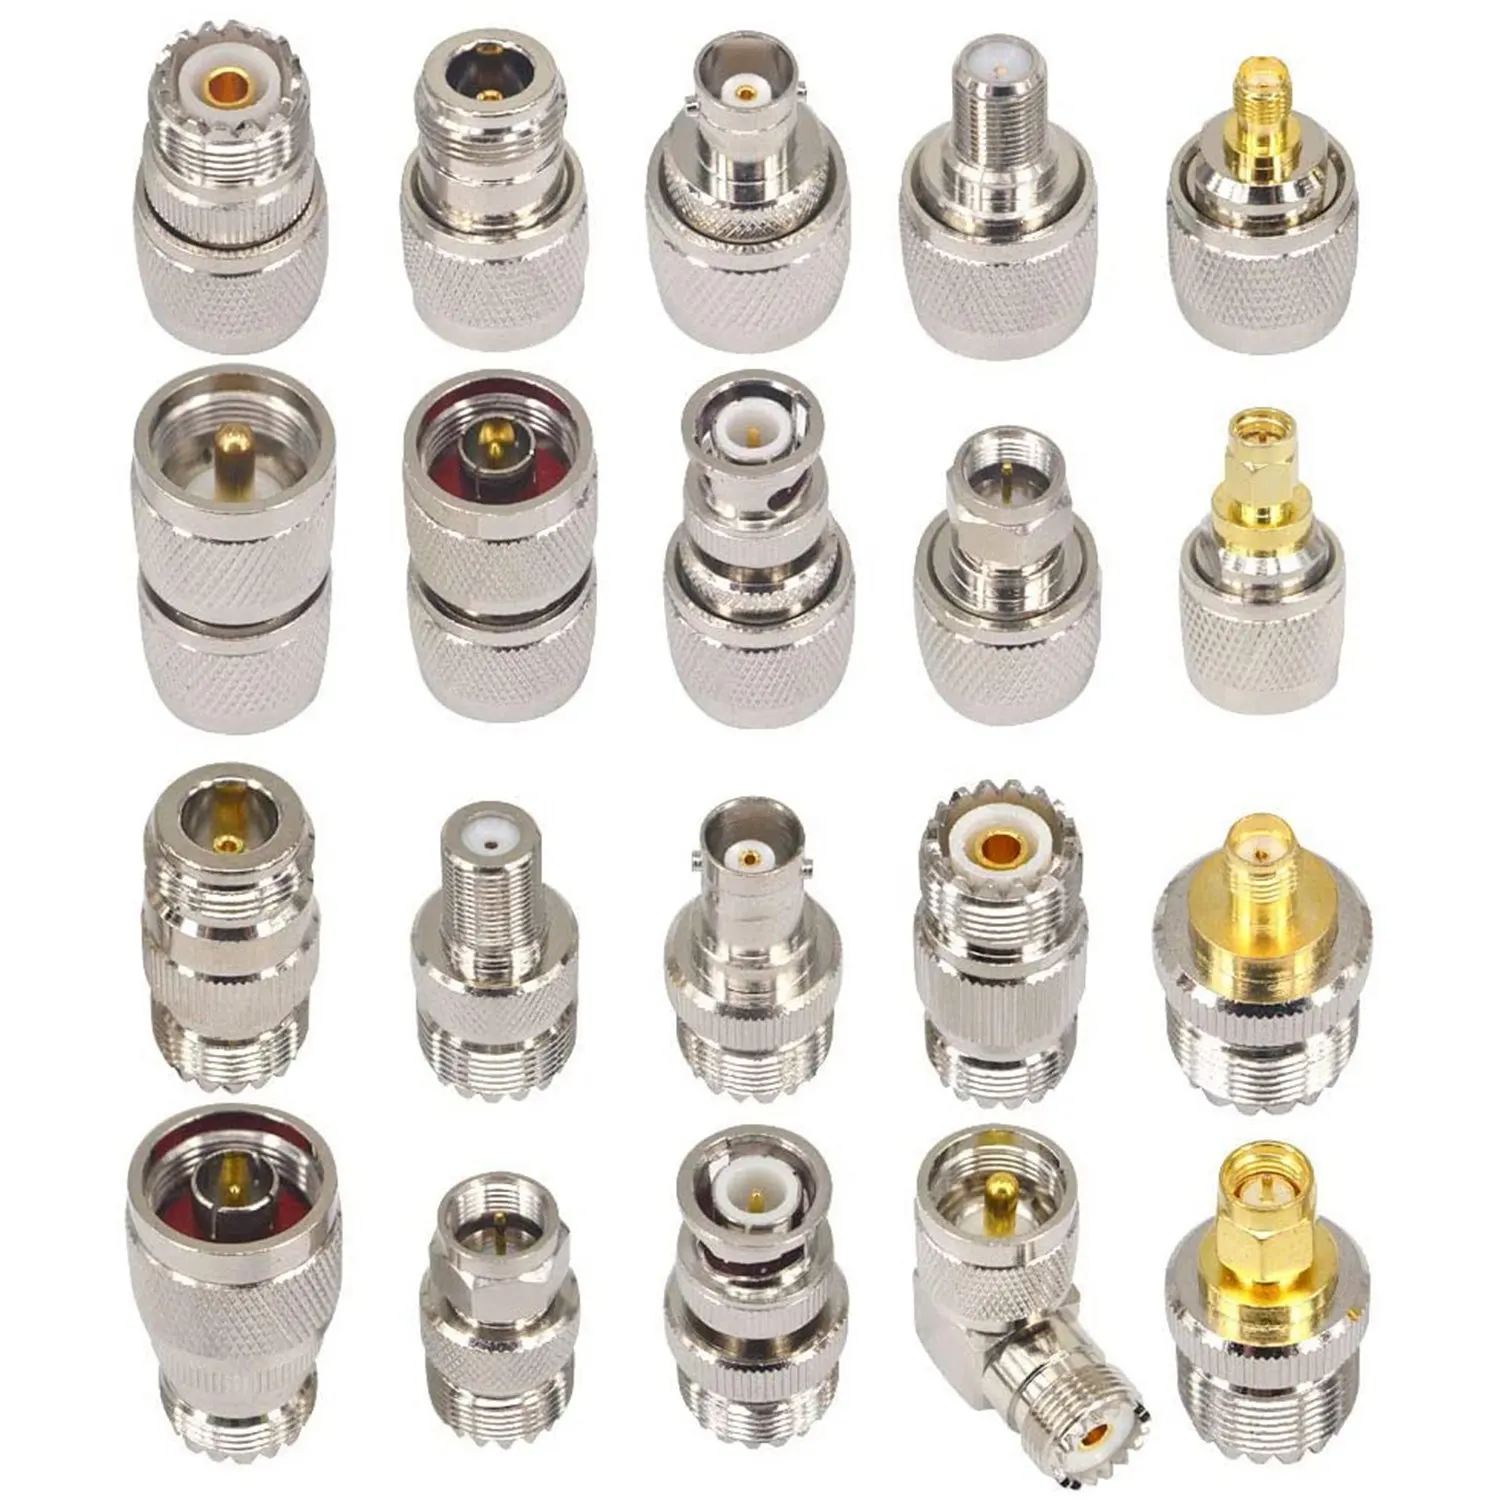 

20PCS RF Coaxial Connector Kit UHF SO239 PL259 Adapter Set UHF to SMA/BNC/N/UHF/F Adapter Coax Adapter for CB Antenna